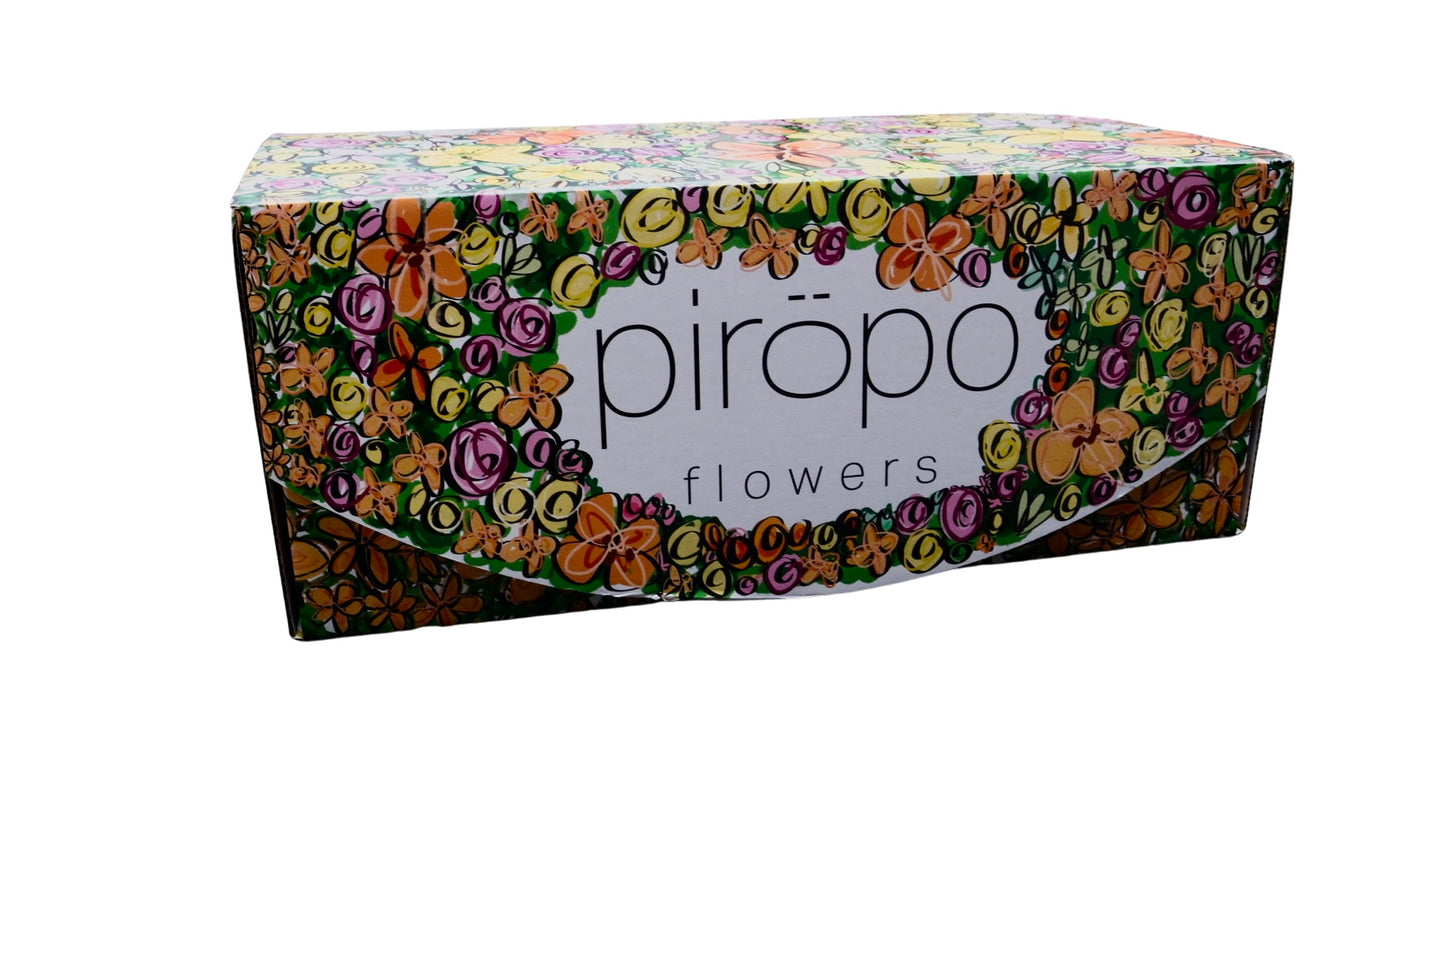 Fantasy for two flowers bouquet with  special gift box piropo flowers